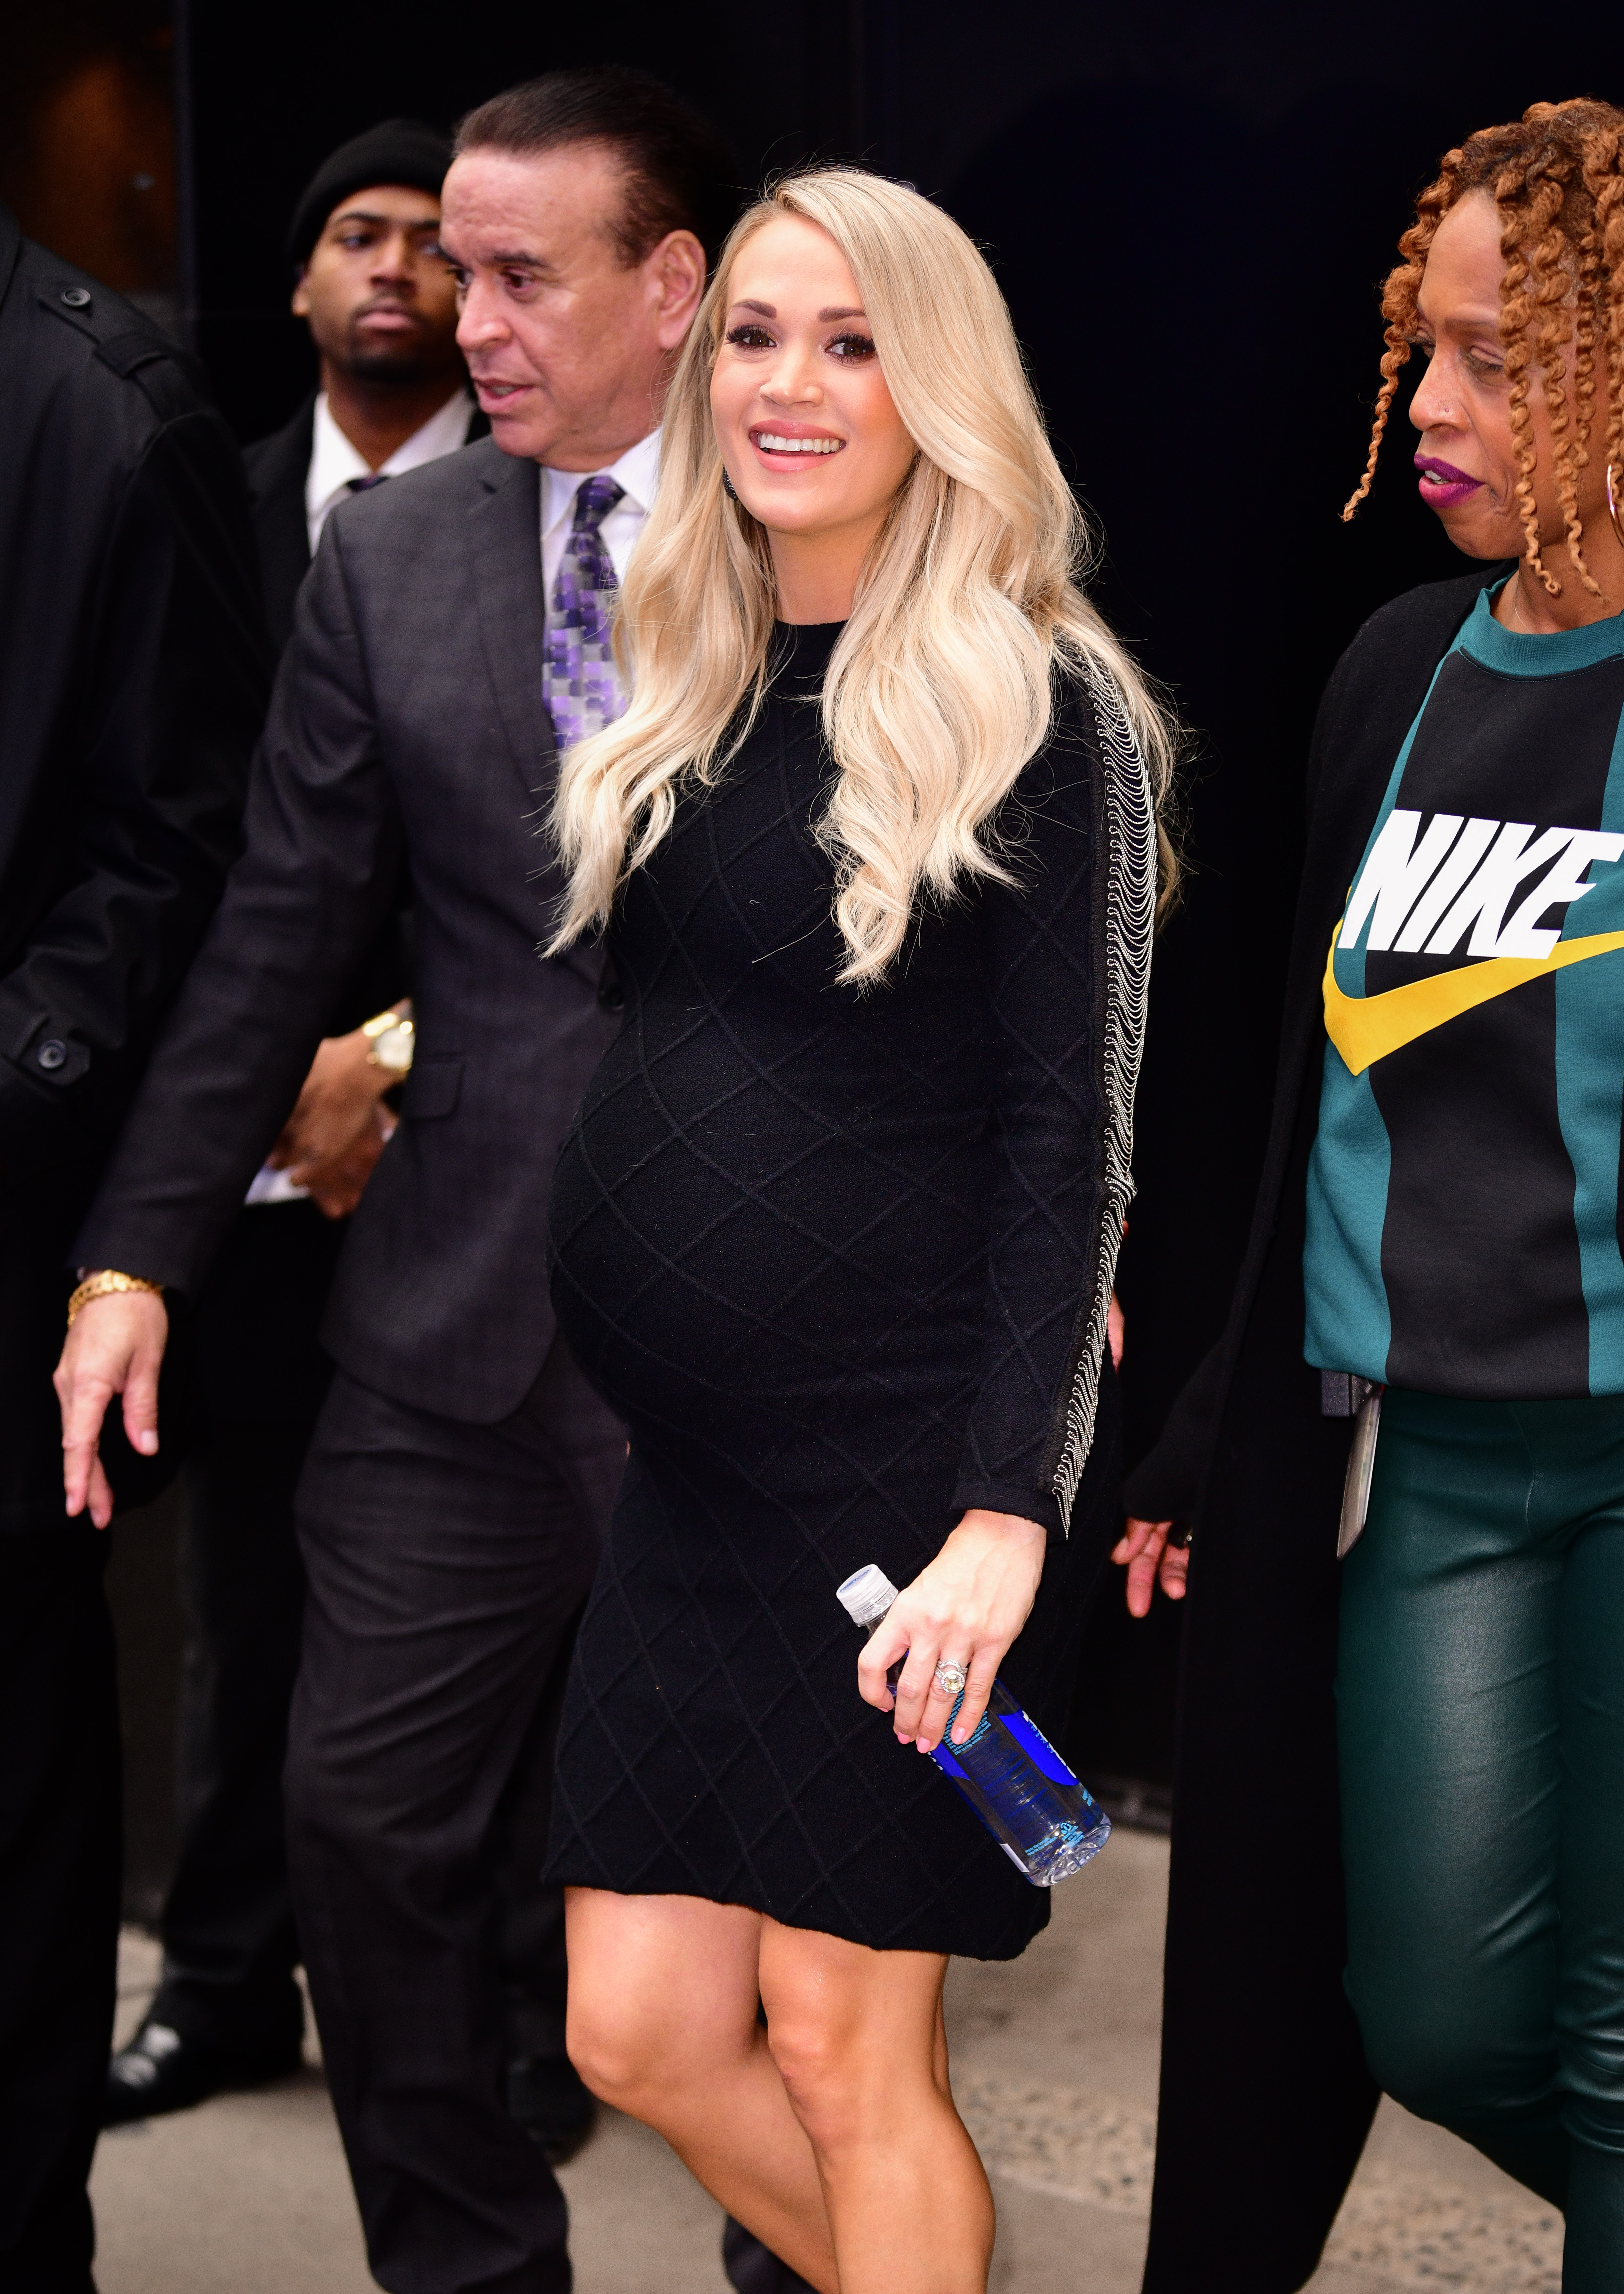 Carrie Underwood is seen leaving ABC's "Good Morning America" in Times Square on November 9, 2018 in New York City. | Source: Getty Images